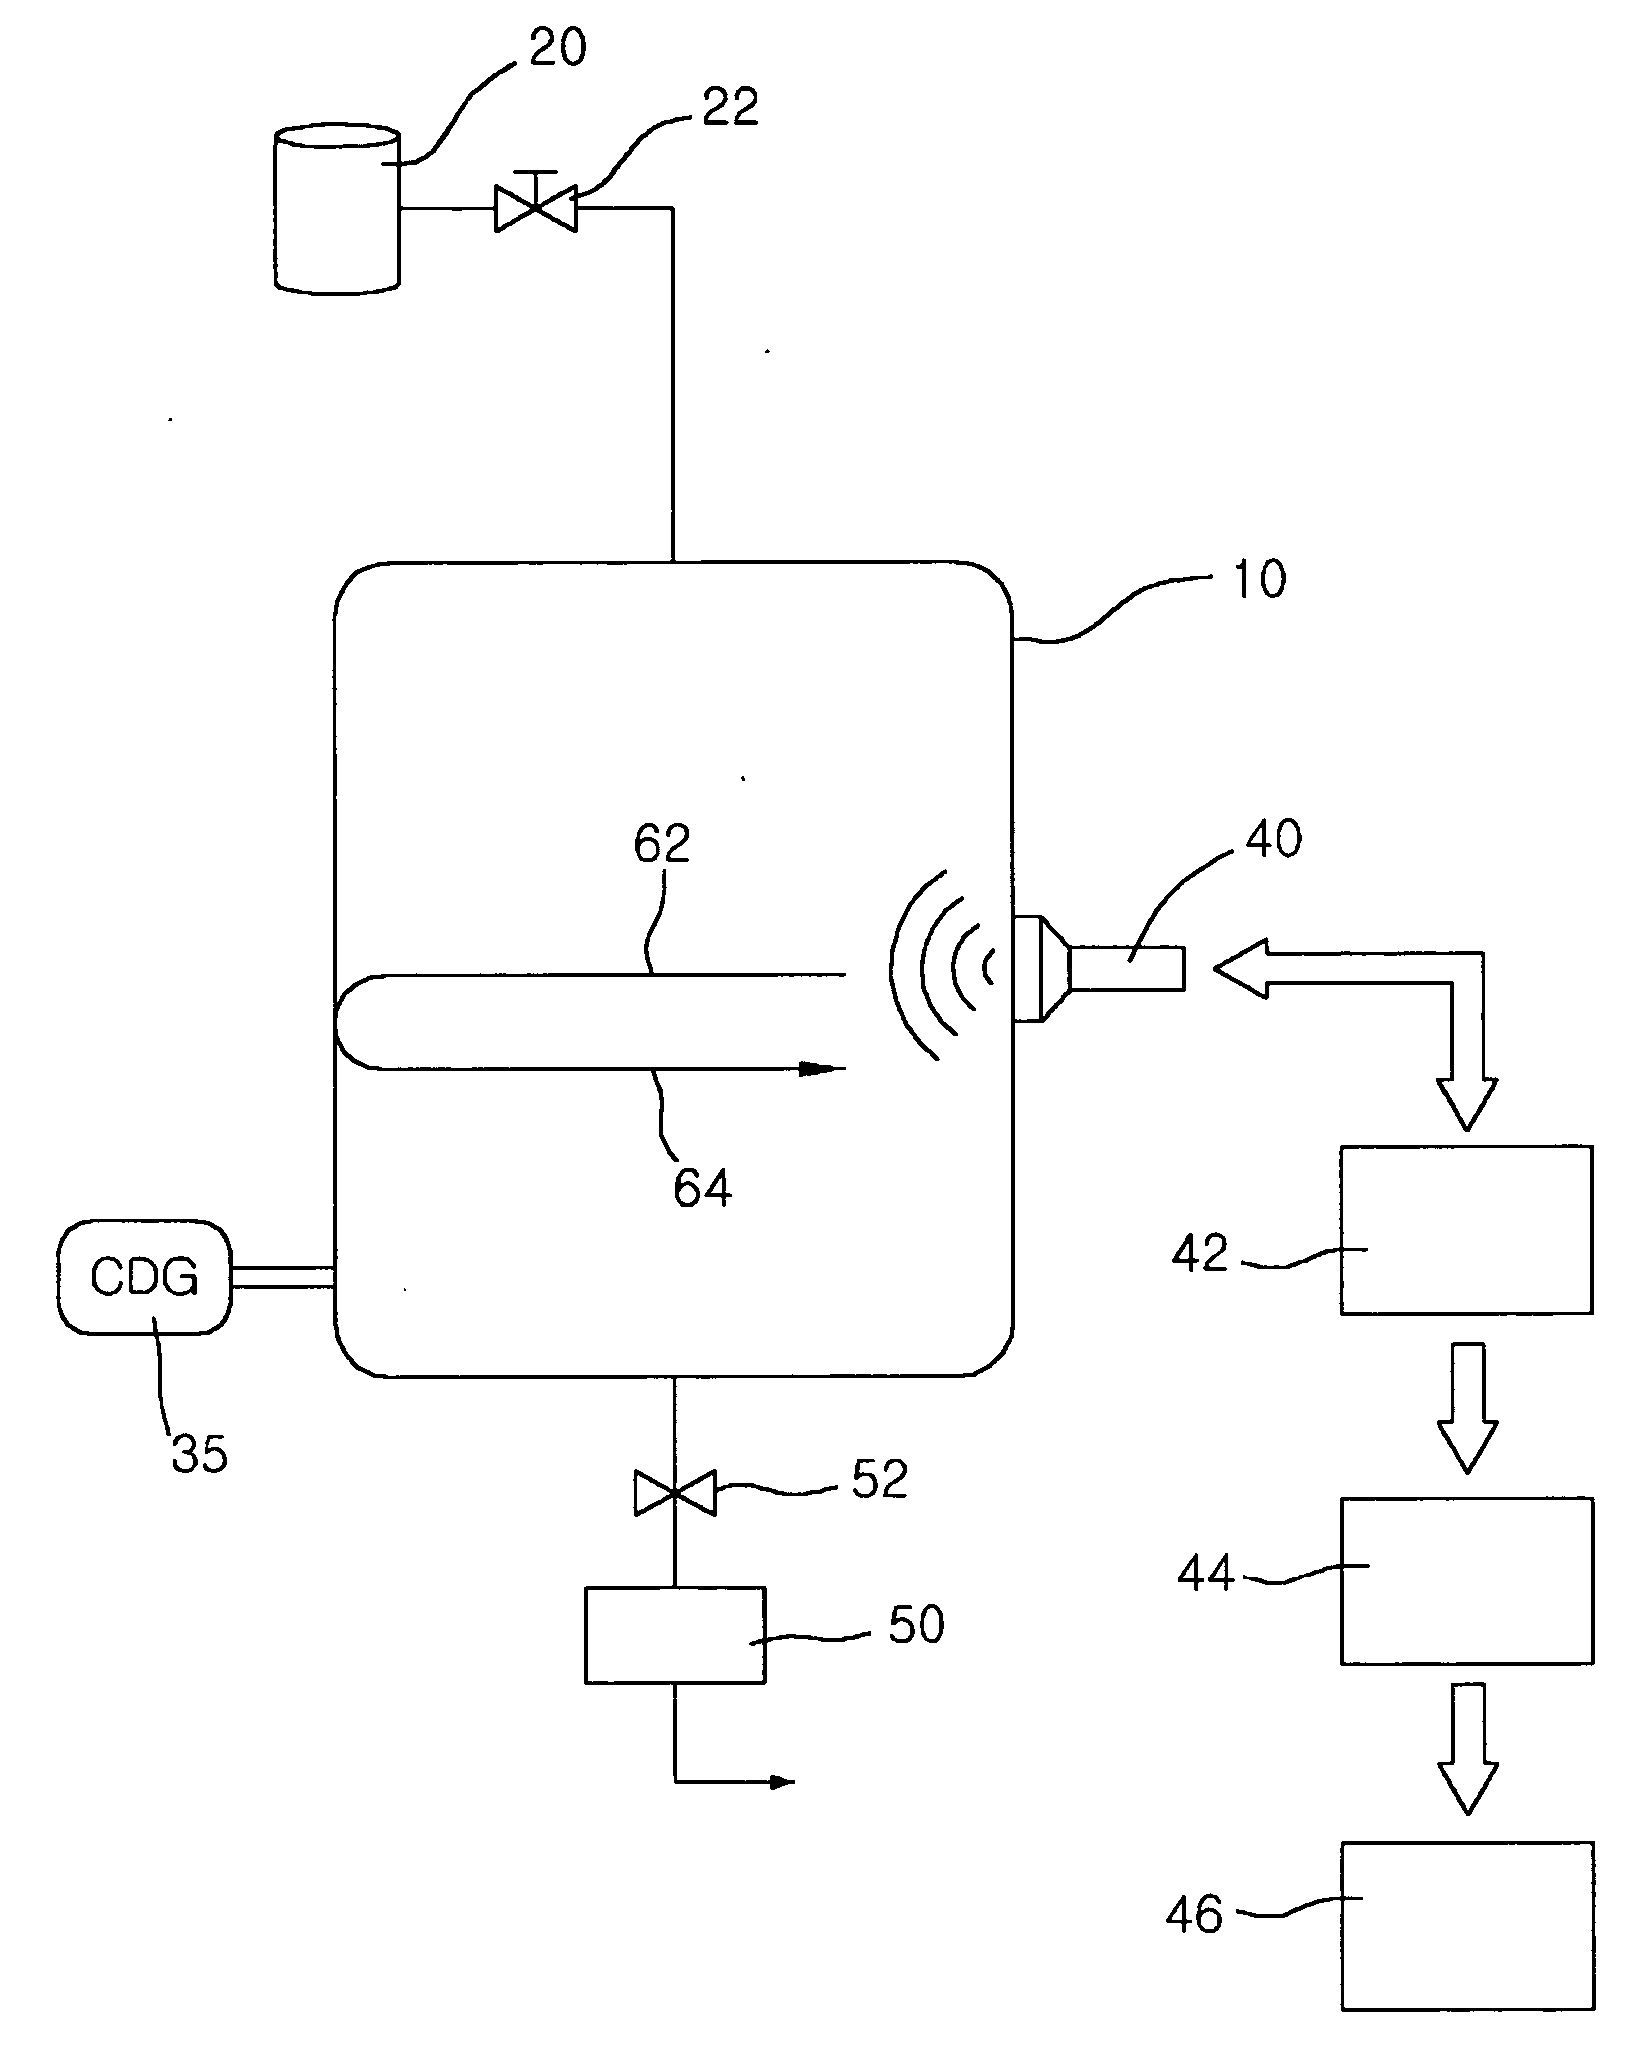 Pressure measuring system for vacuum chamber using ultrasonic wave